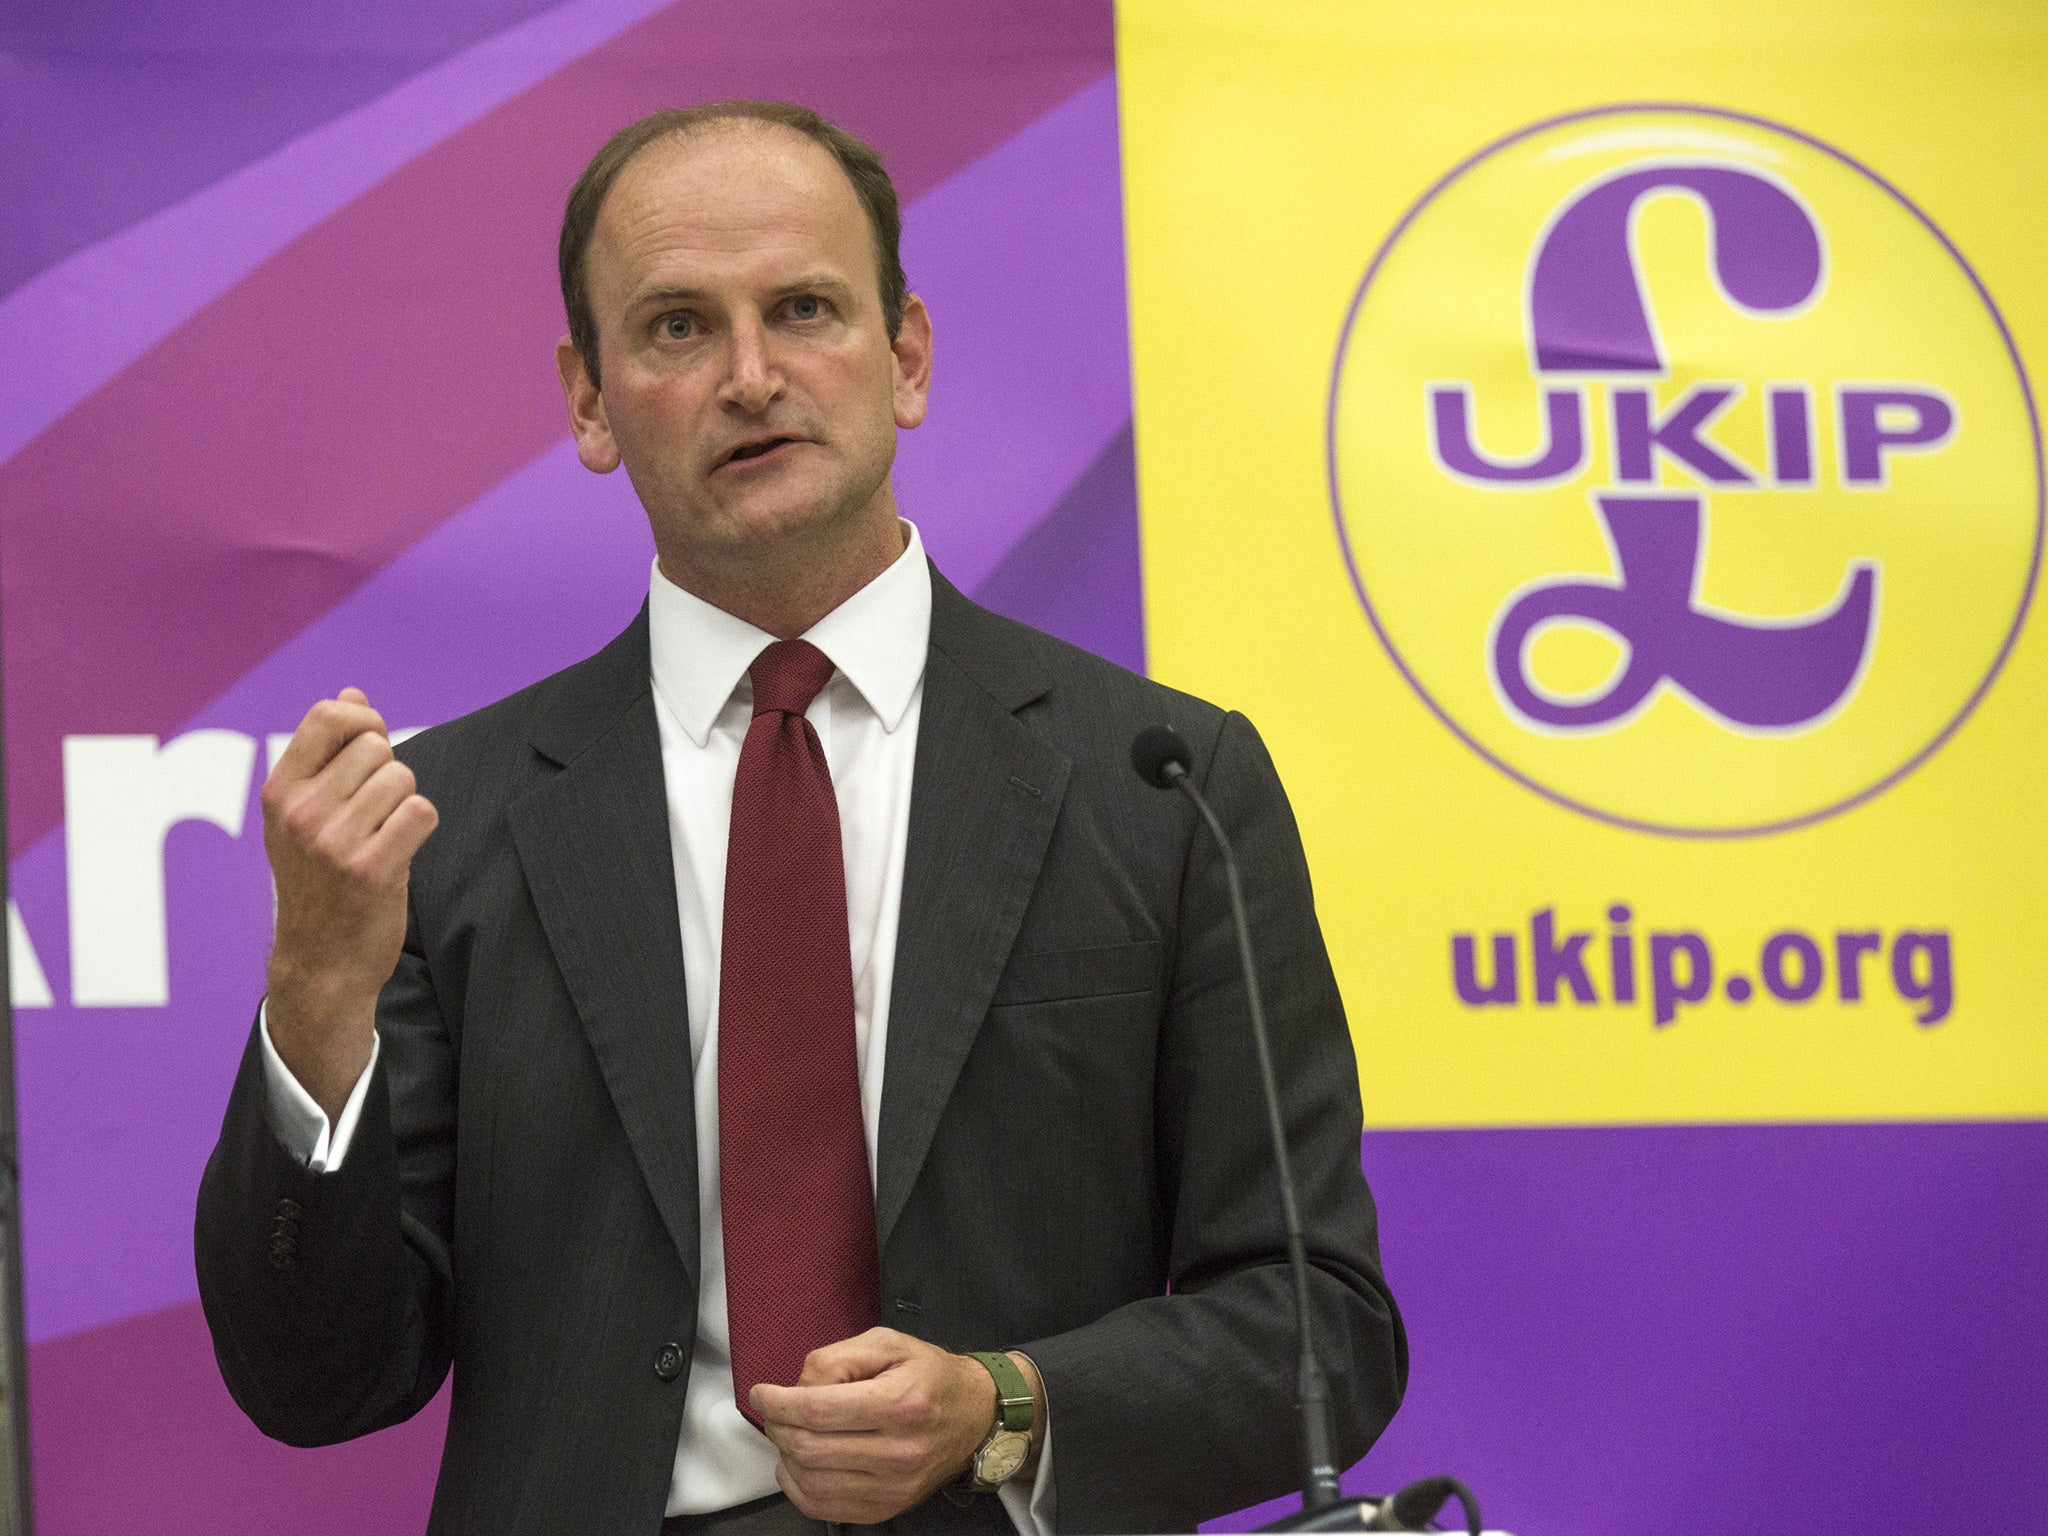 Douglas Carswell says Ukip should be 'prepared to reject' the £650,000 funds